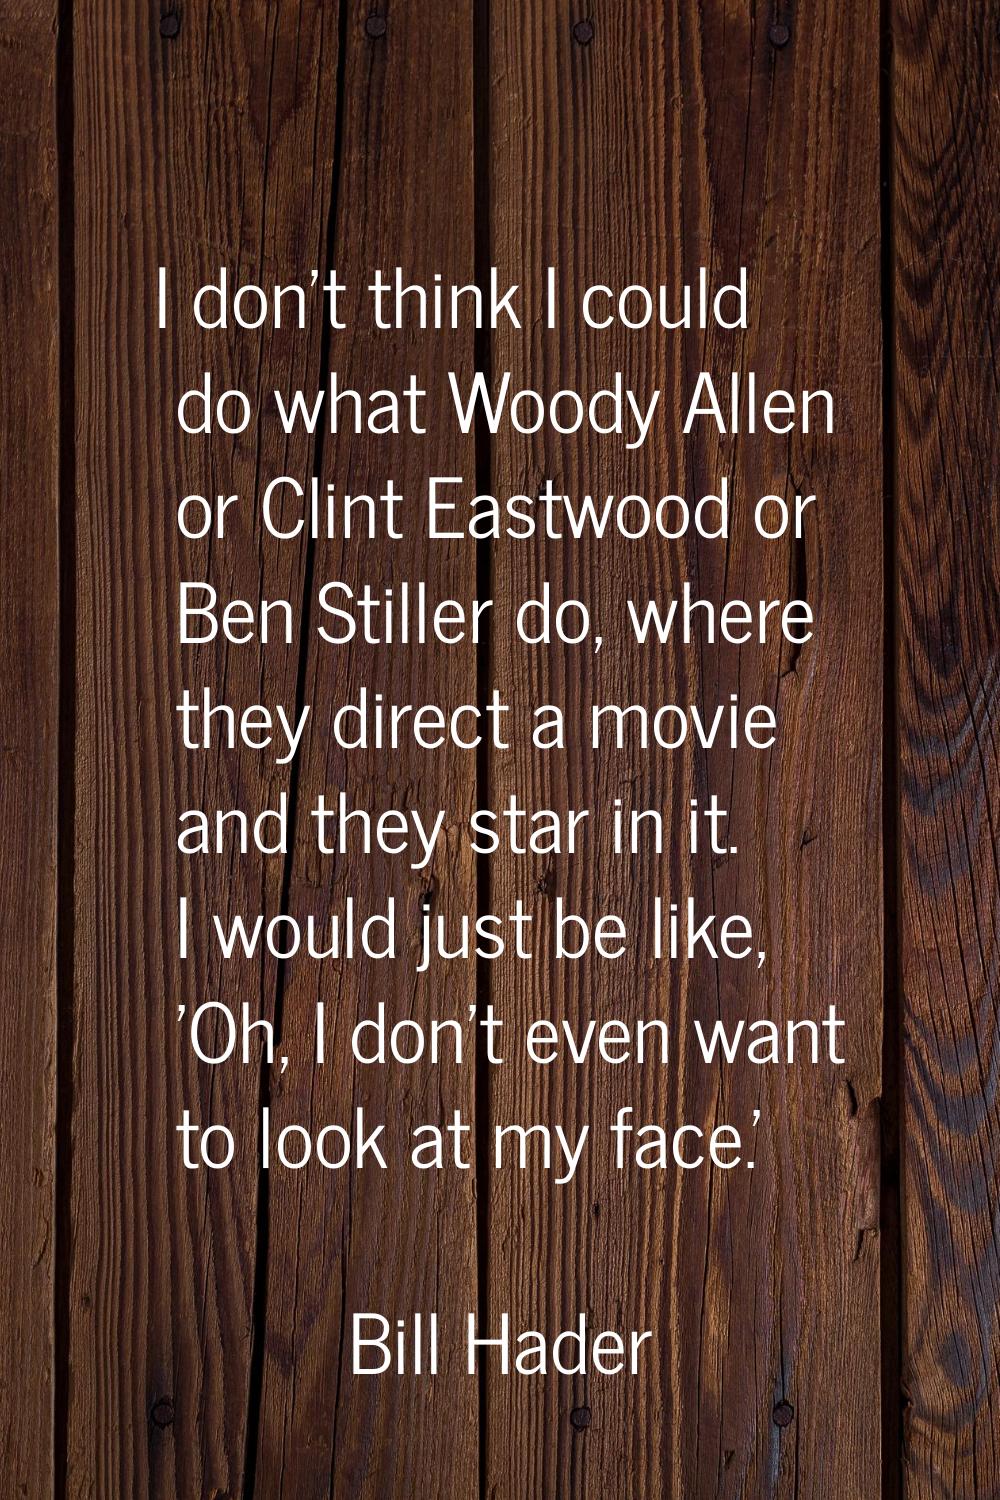 I don't think I could do what Woody Allen or Clint Eastwood or Ben Stiller do, where they direct a 